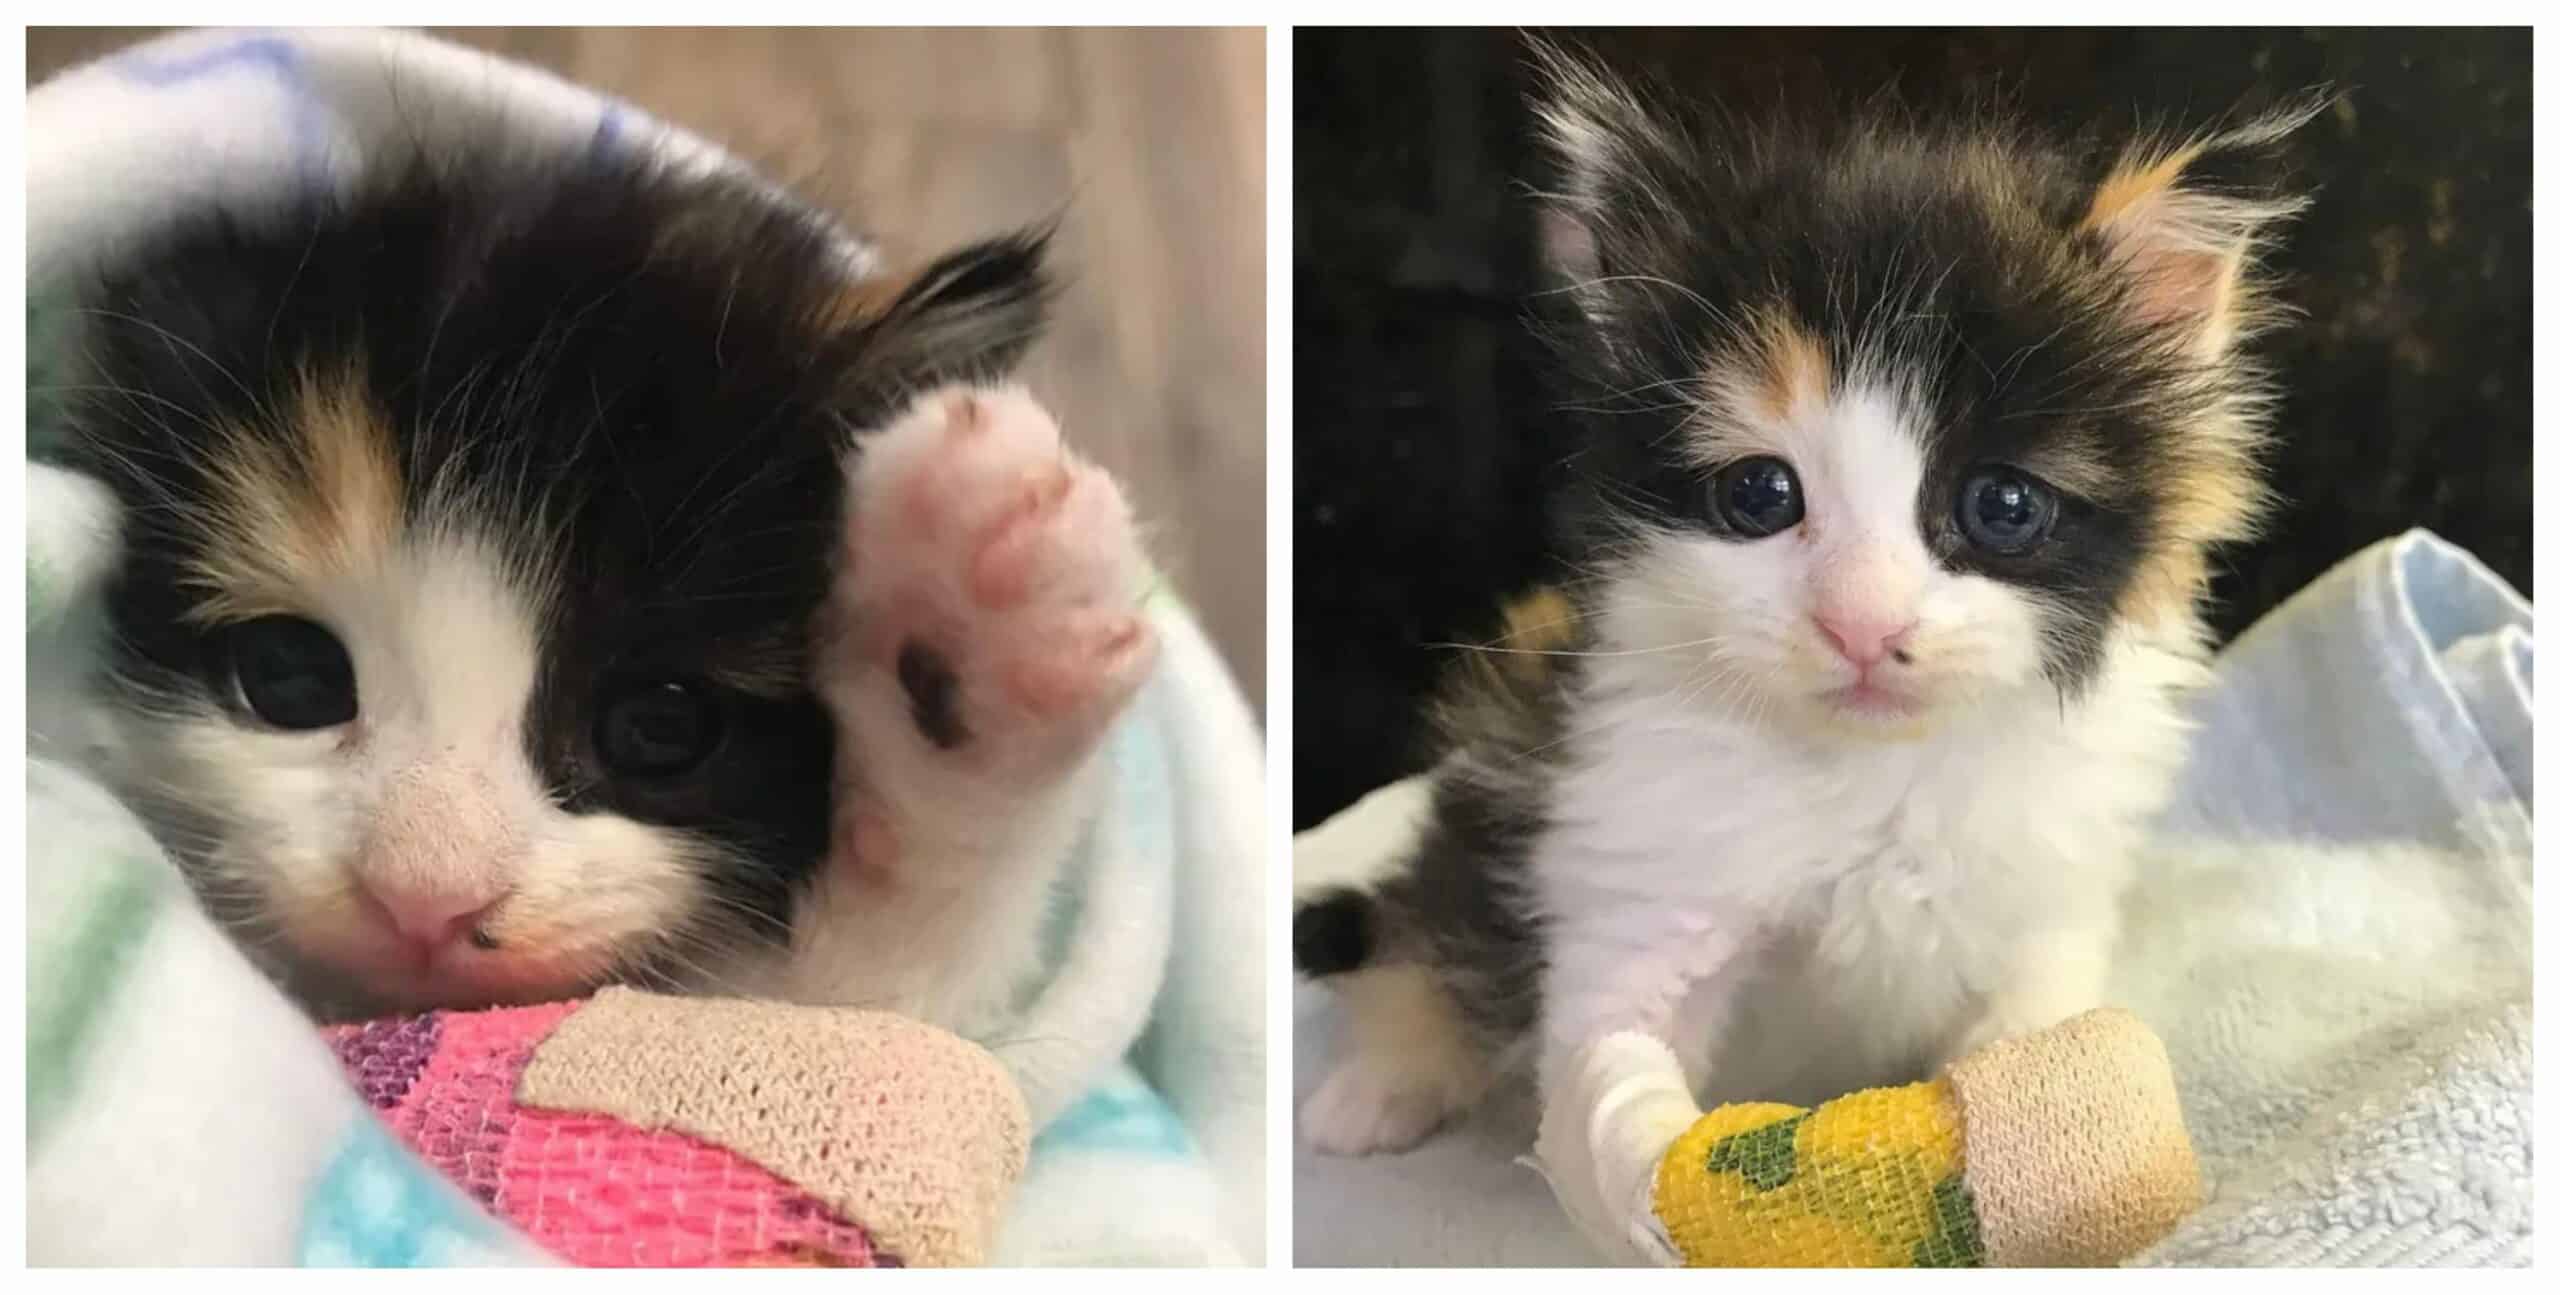 A kitten found in a nursery is thankful for help and keen to recover